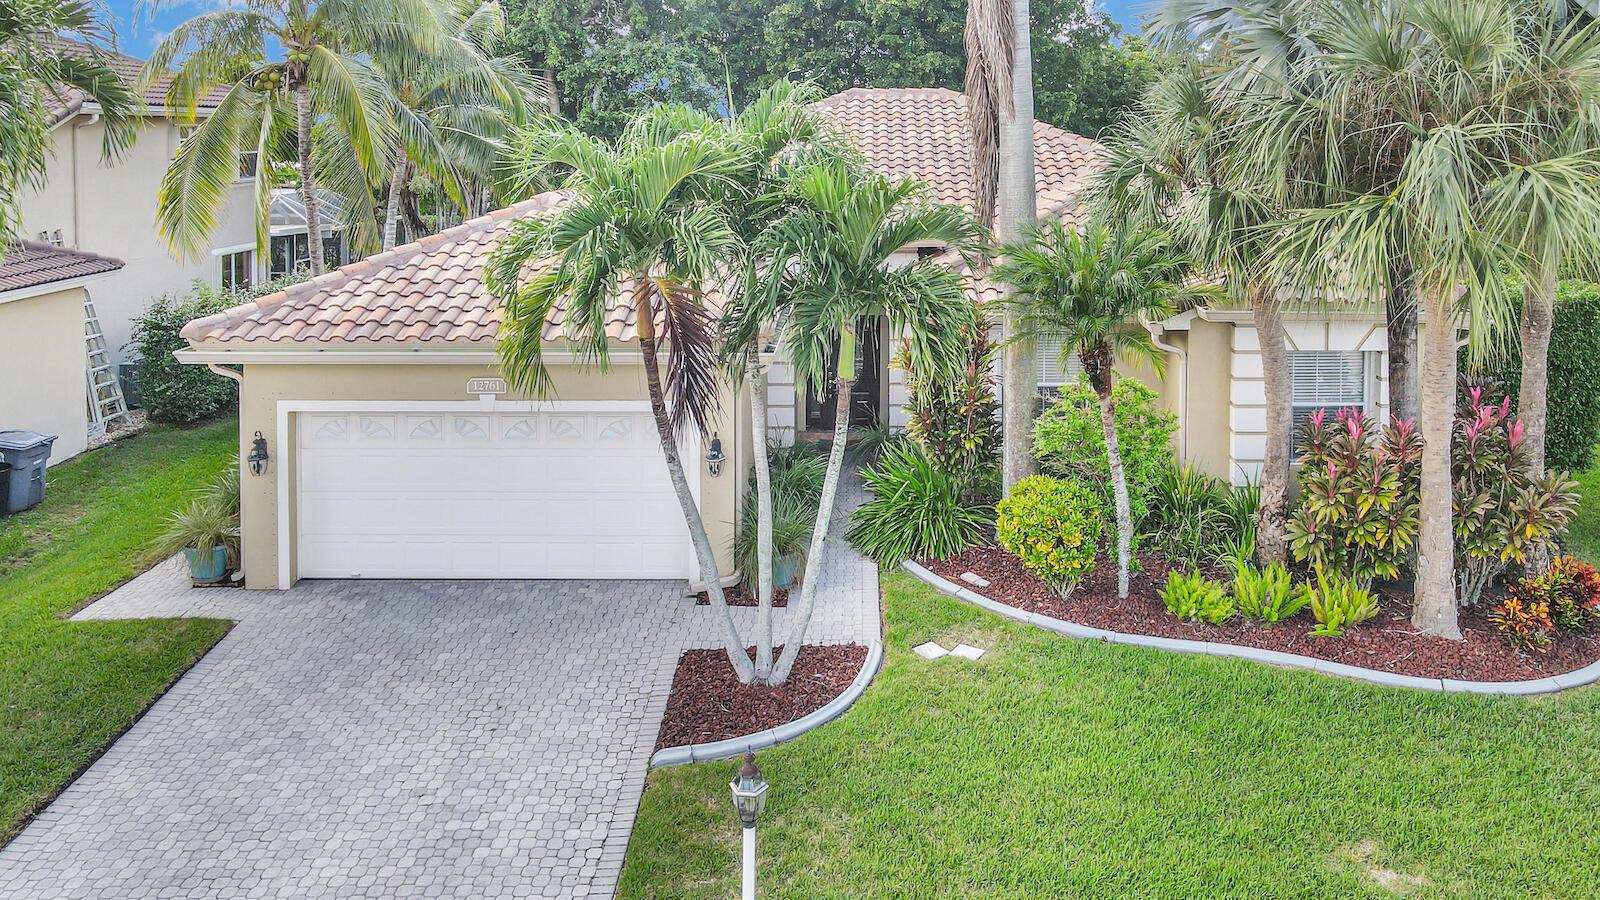 Much sought after Boca Winds, you will fall in love with this home and the area.  Walk to all top rated schools k-12 and a 3800 acre South County Regional park with water park, golf, baseball, softball, pickleball, boating, ampitheater and more.  This home located in a cul-de-sac has been meticulously maintained from top to bottom to include new 2021 s-tile roof, updated kitchen and baths, 500 plus square foot screened porch and more.  Boca winds offers 2 community pools, tennis, basketball, playground, and At&T fiber optics.  Perfect community to raise your kids!